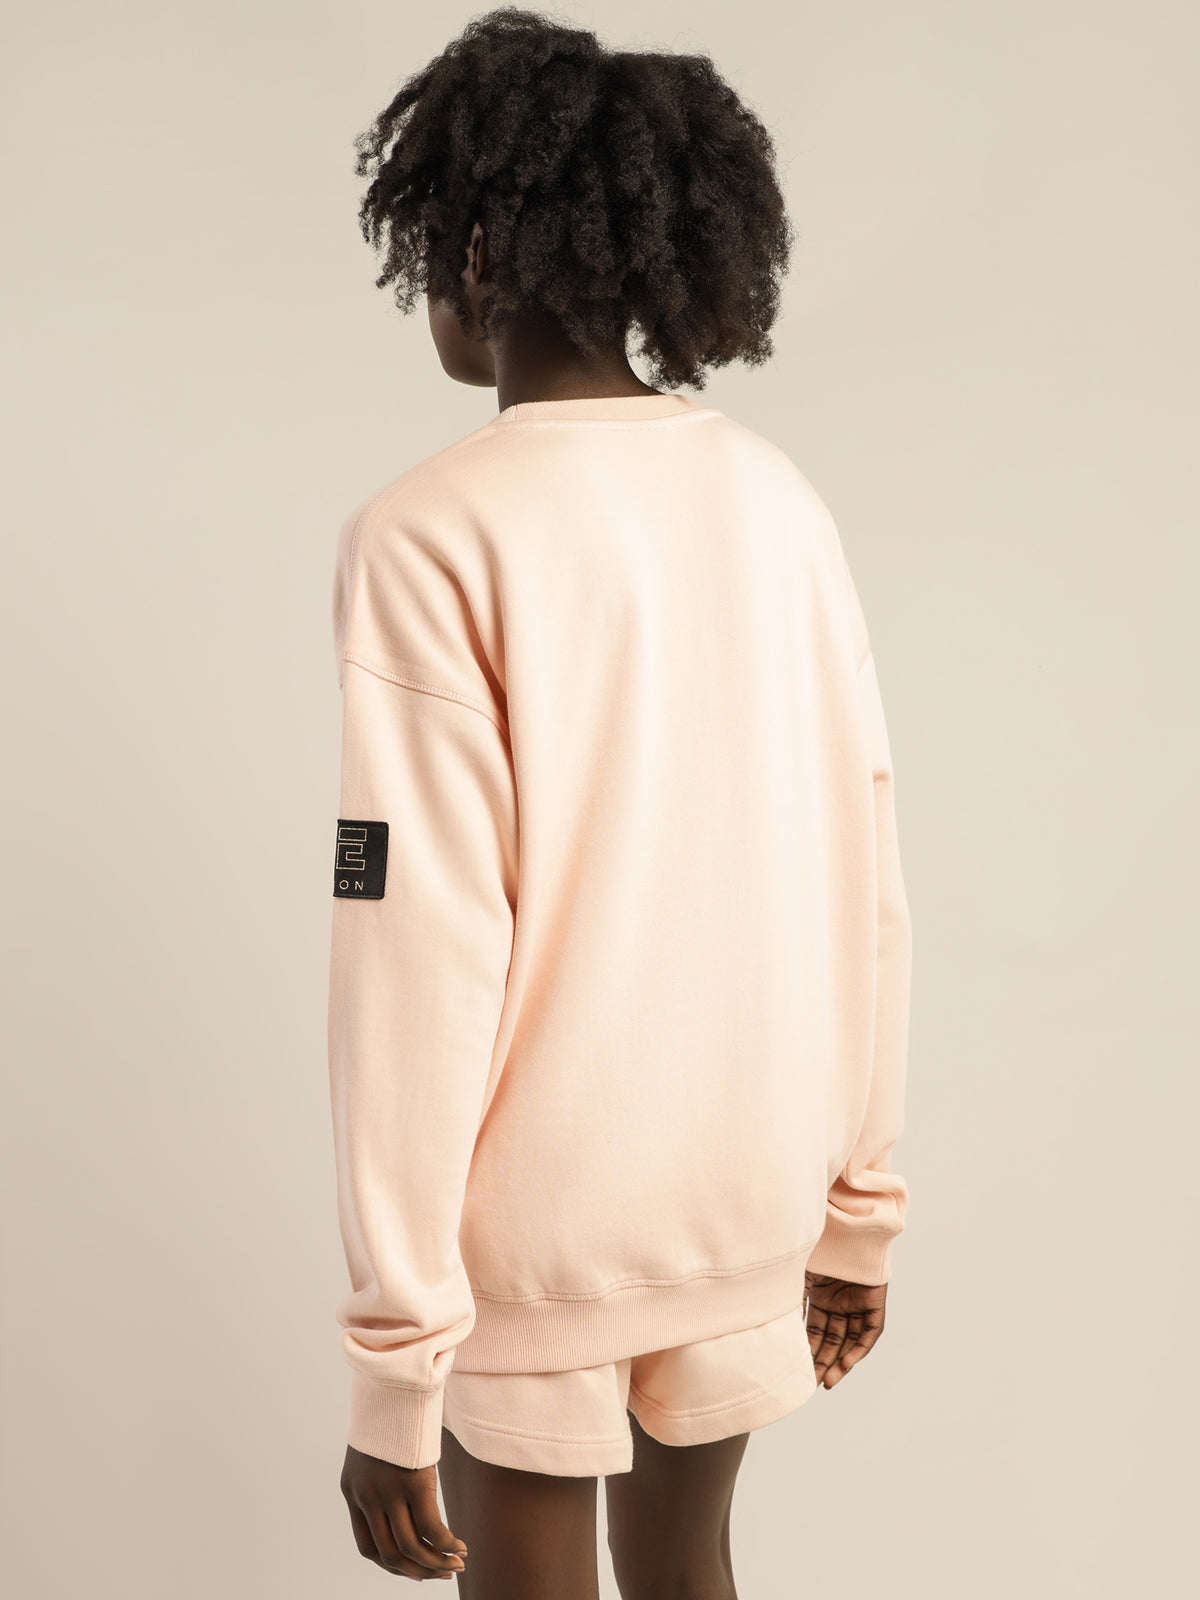 All Around Sweater in Pale Candy Pink